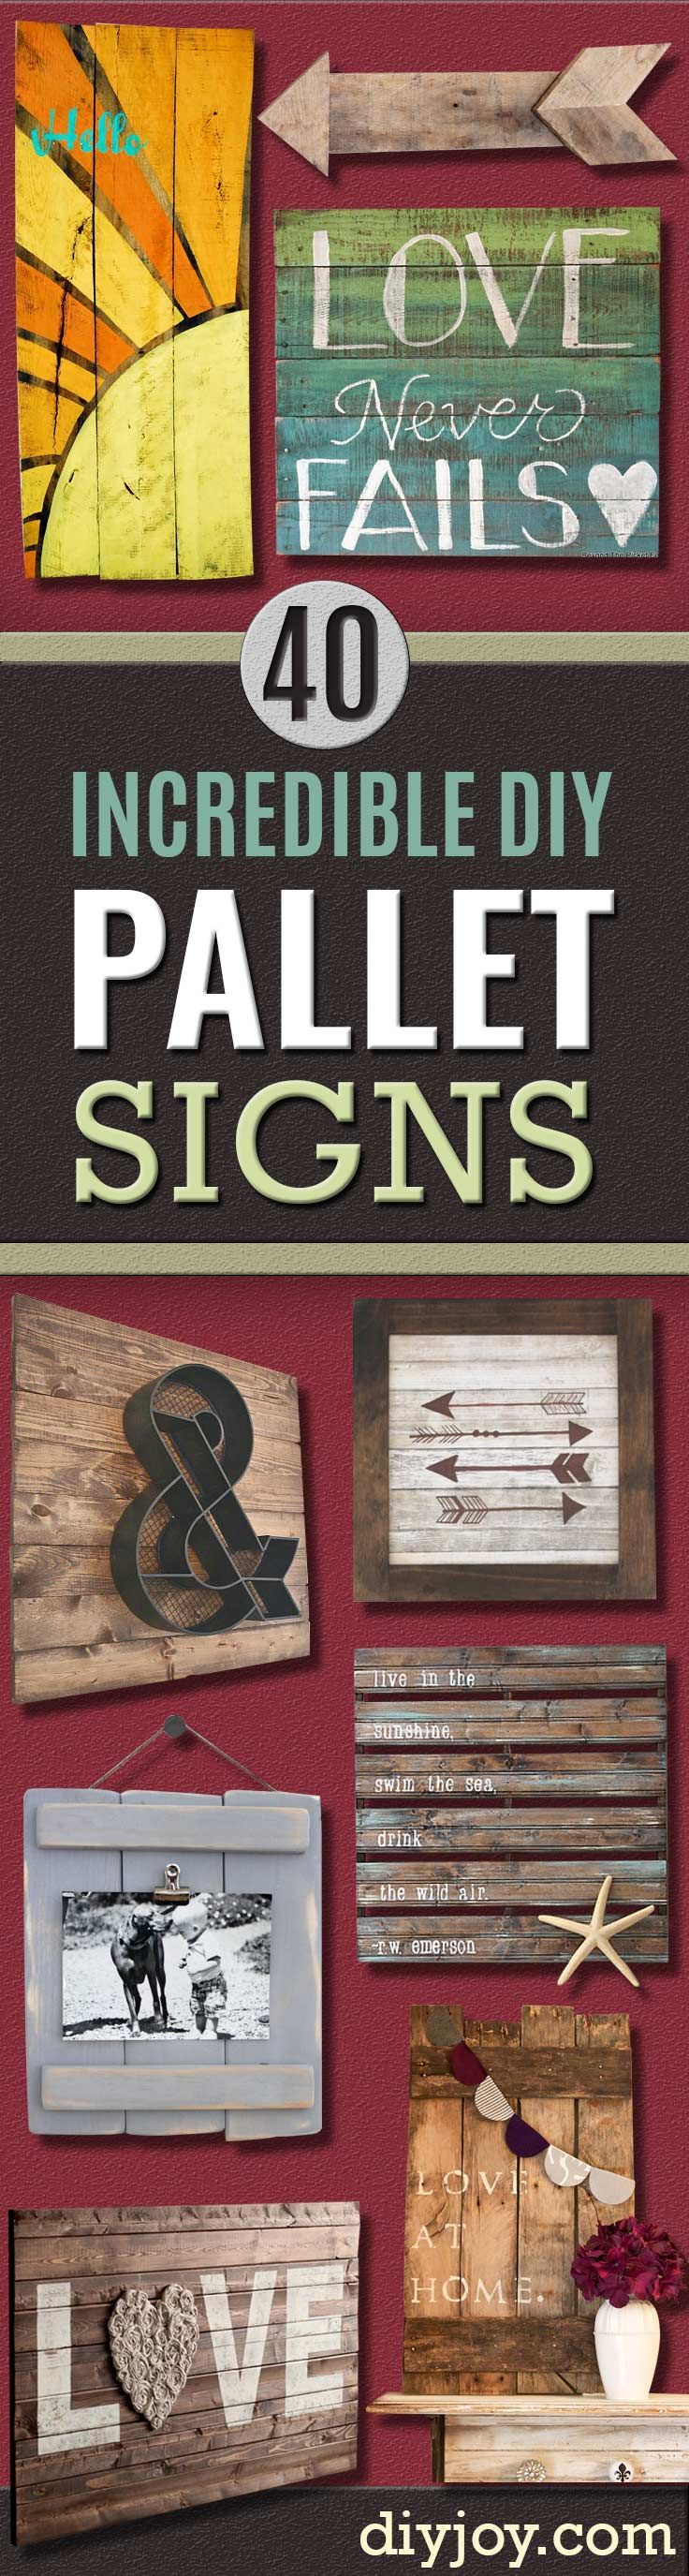 DIY Pallet sign Ideas – Cool Homemade Wall Art Ideas and Pallet Signs for Bedroom, Living Room, Patio and